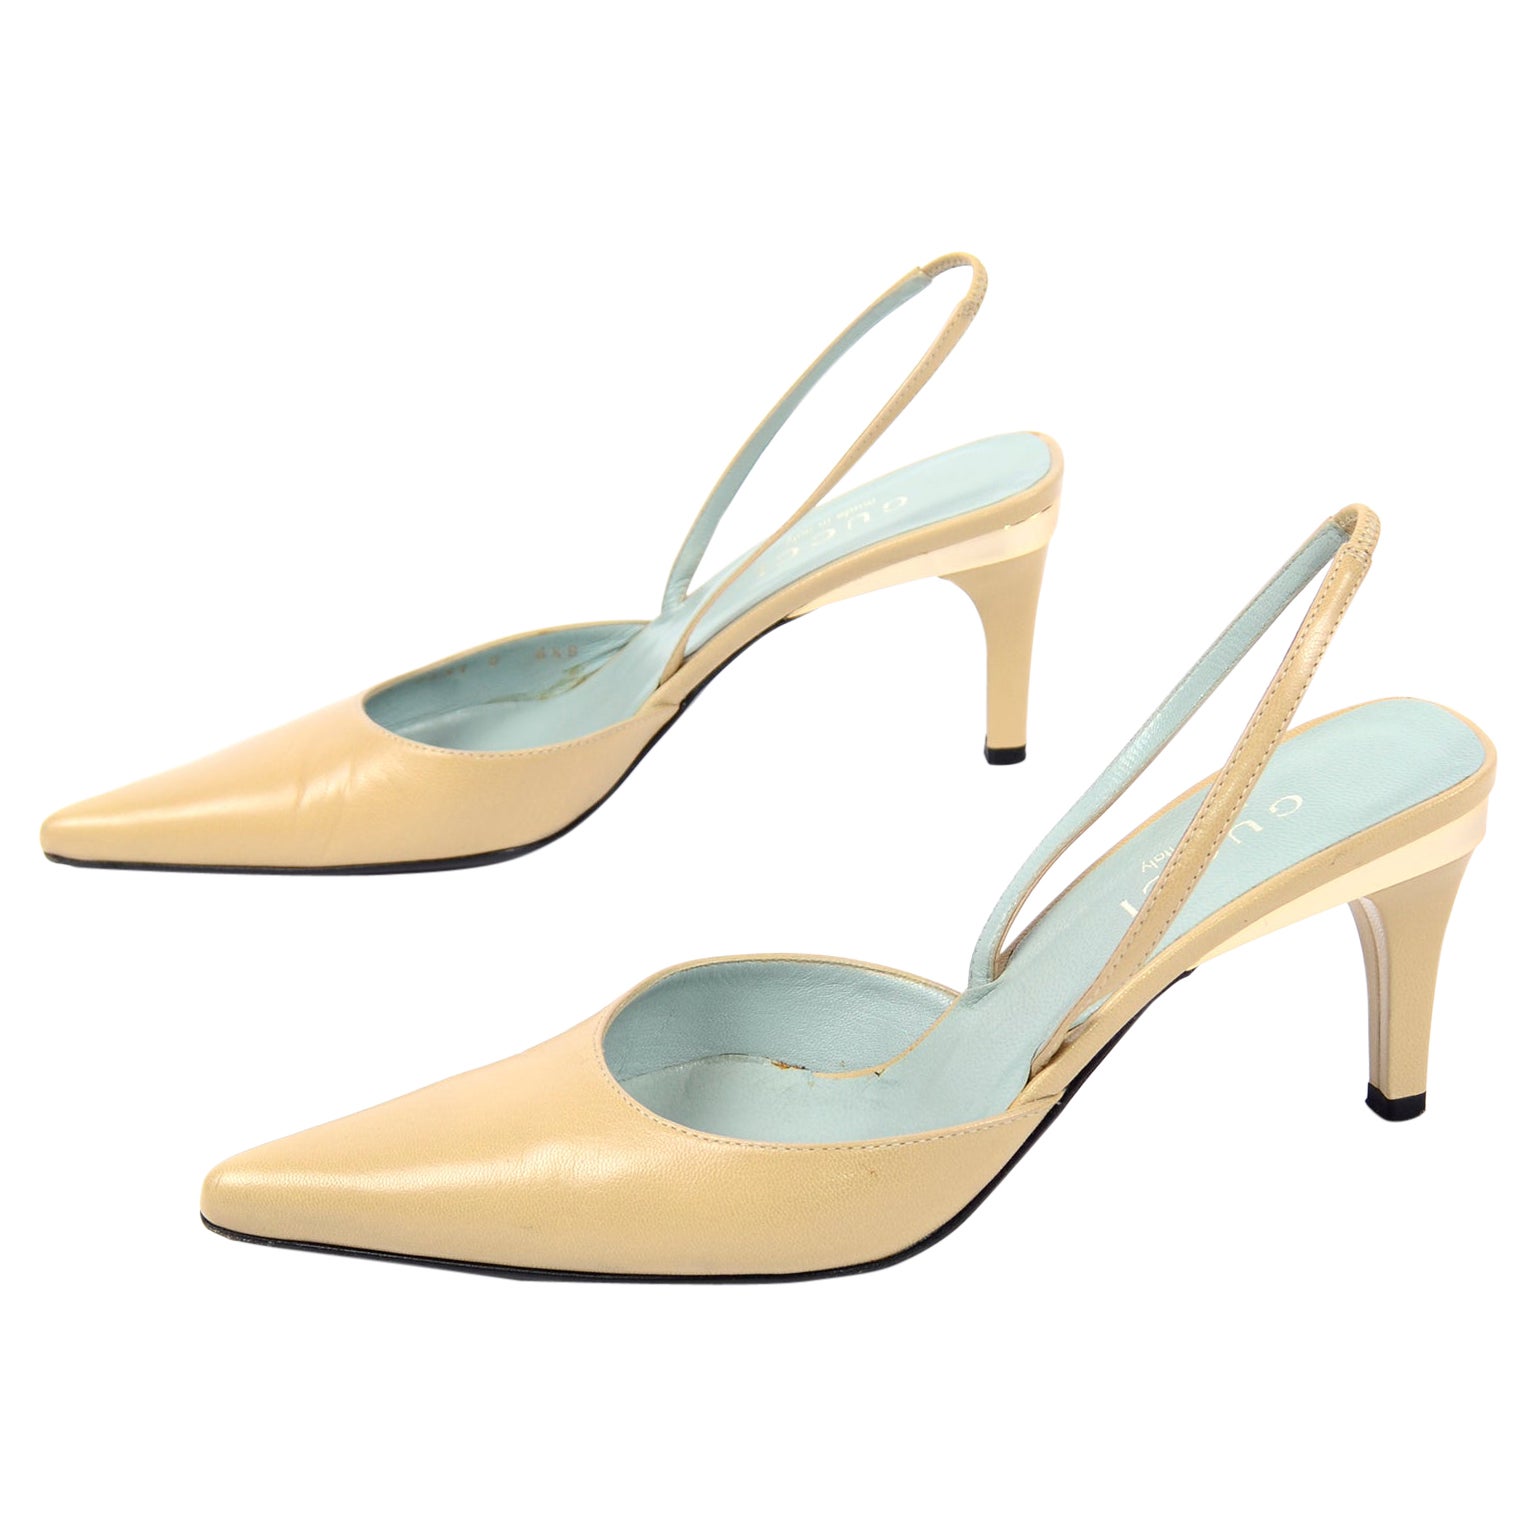 Gucci Slingback Beige Tan Heels With Gold Bands For Sale